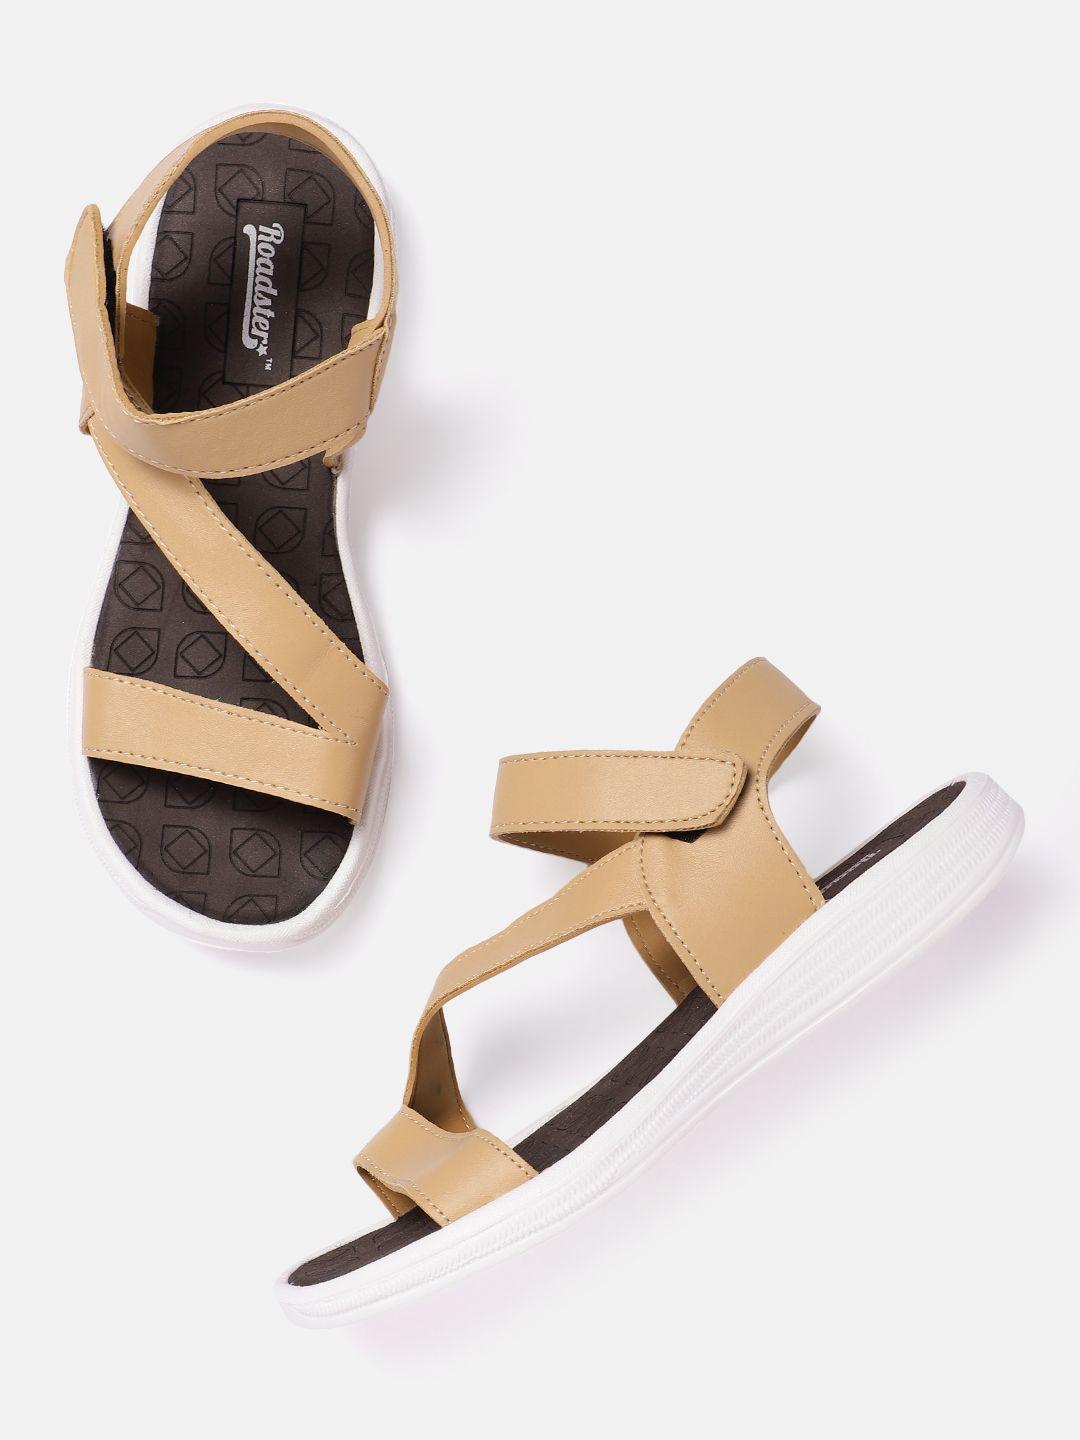 the-roadster-lifestyle-co.-women-sports-sandals